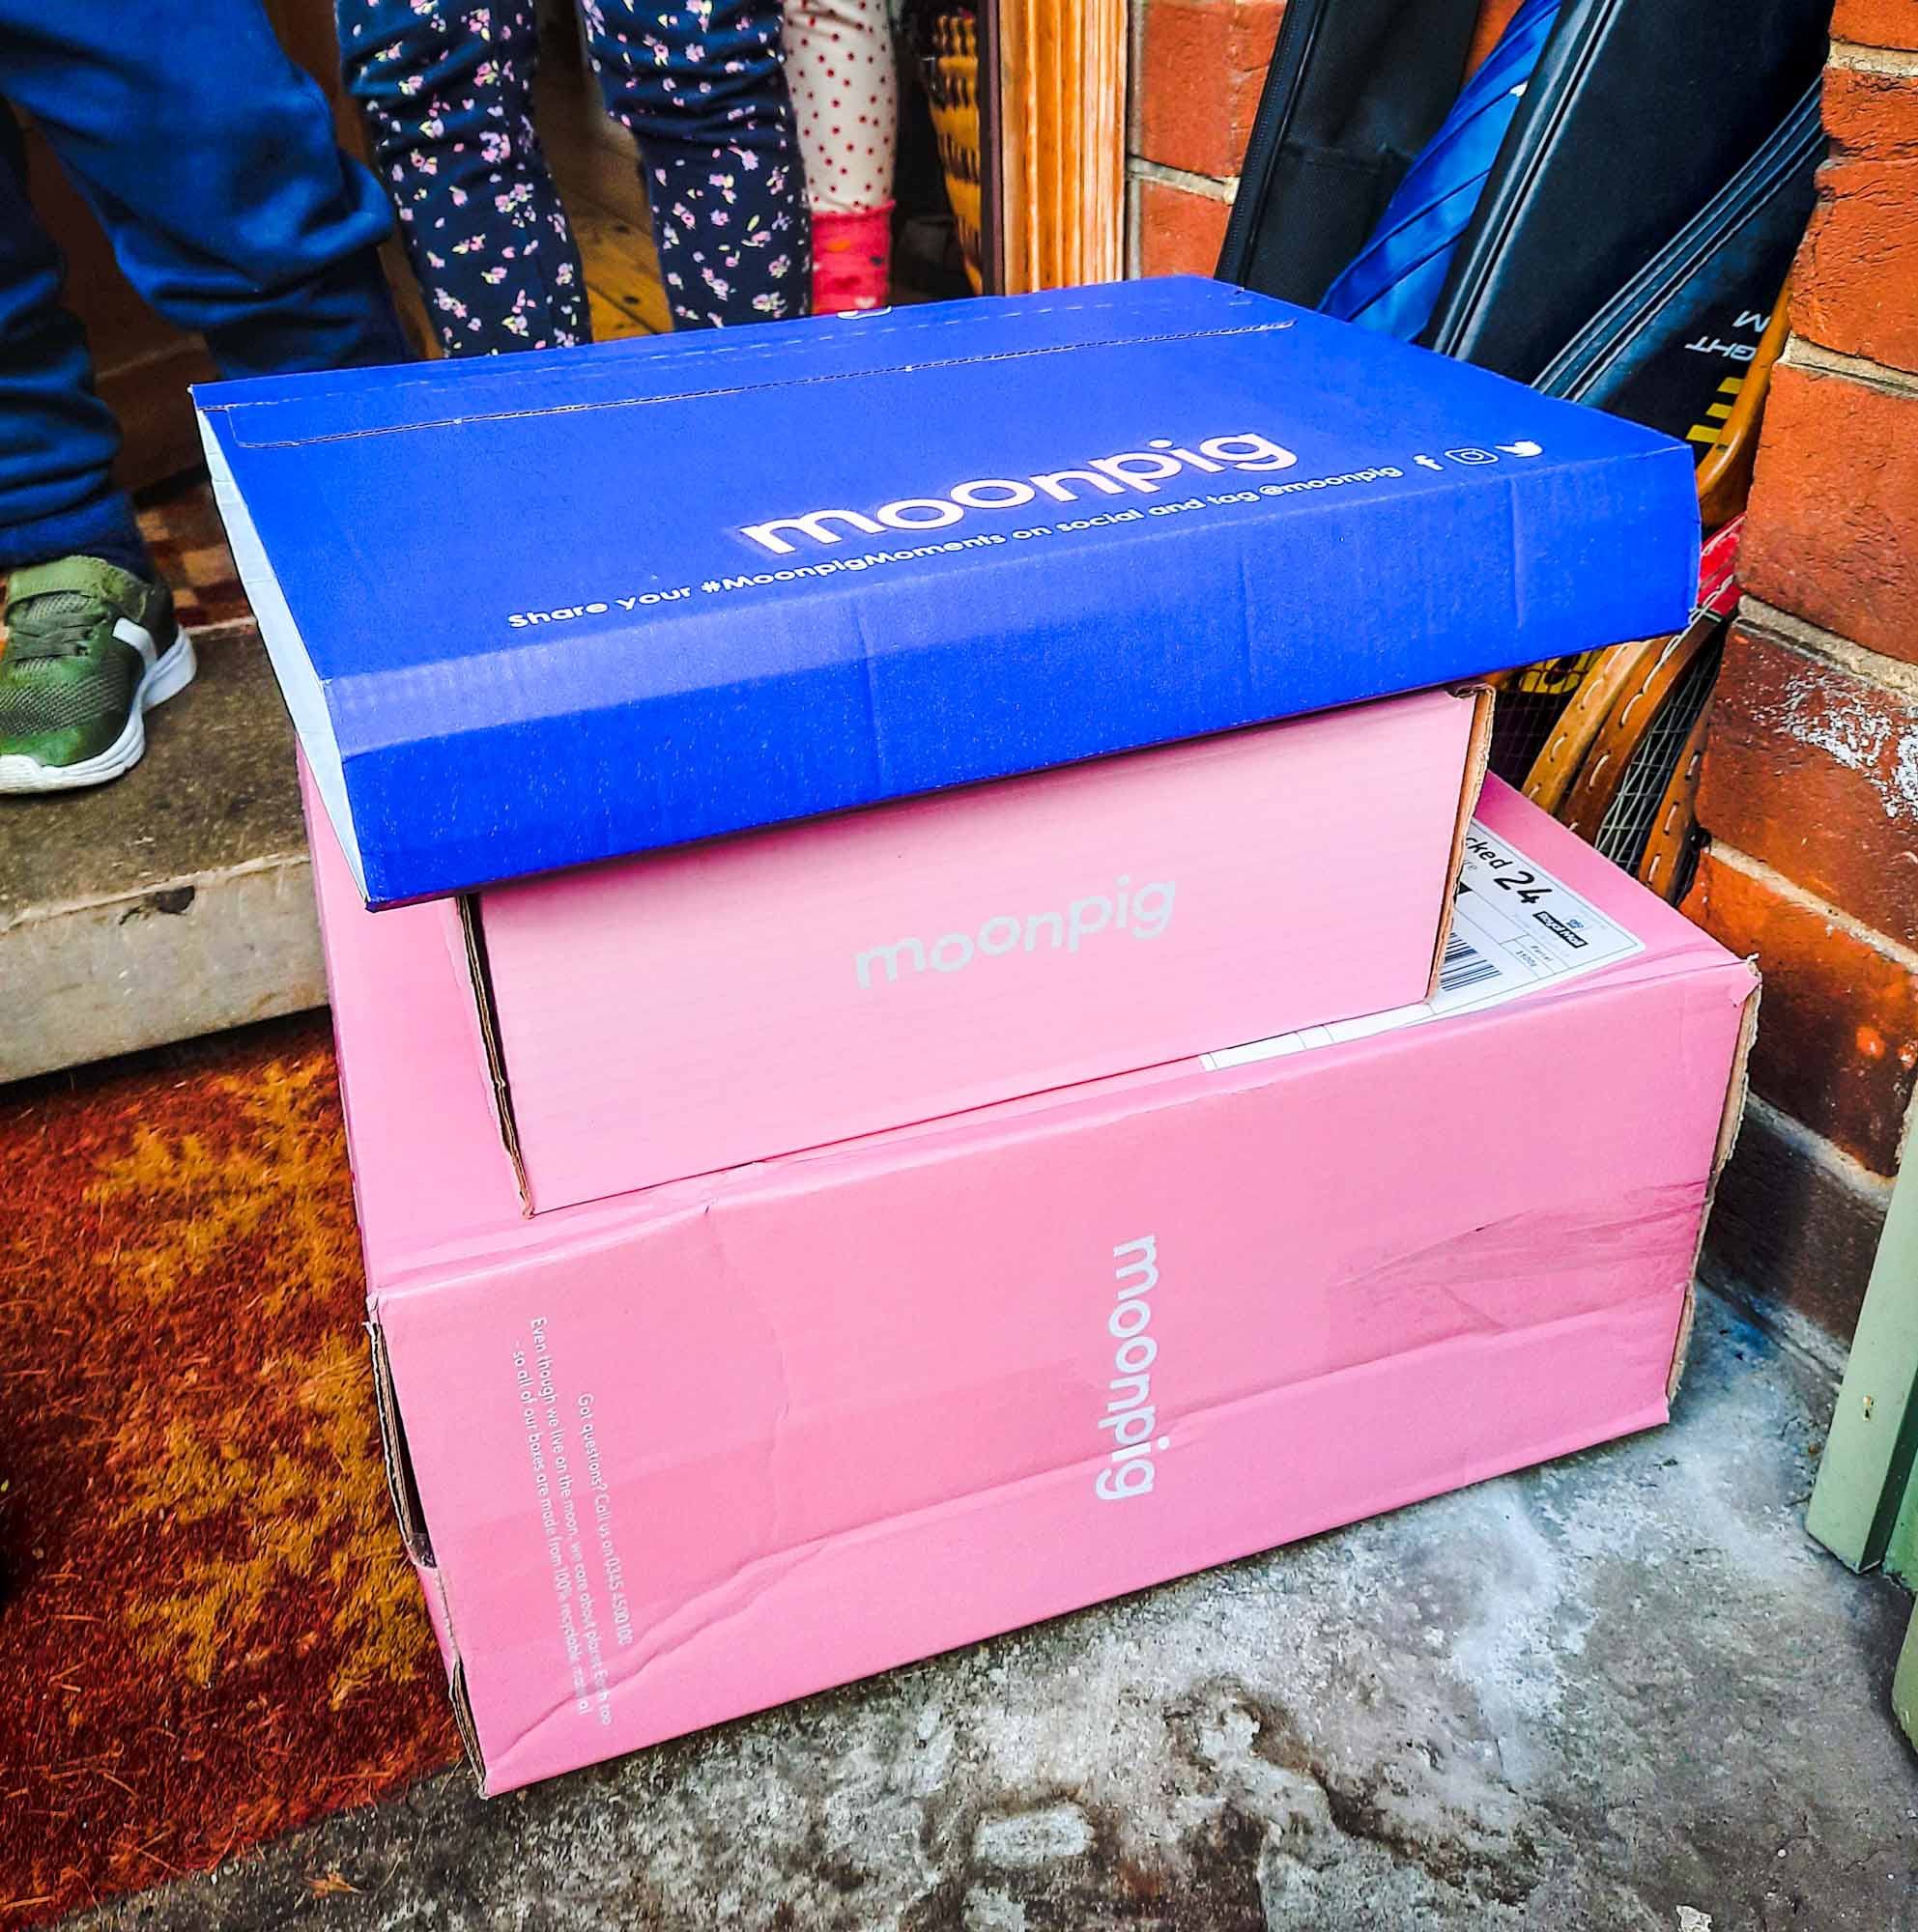 Pile of parcels on a doorstep, from Moonpig